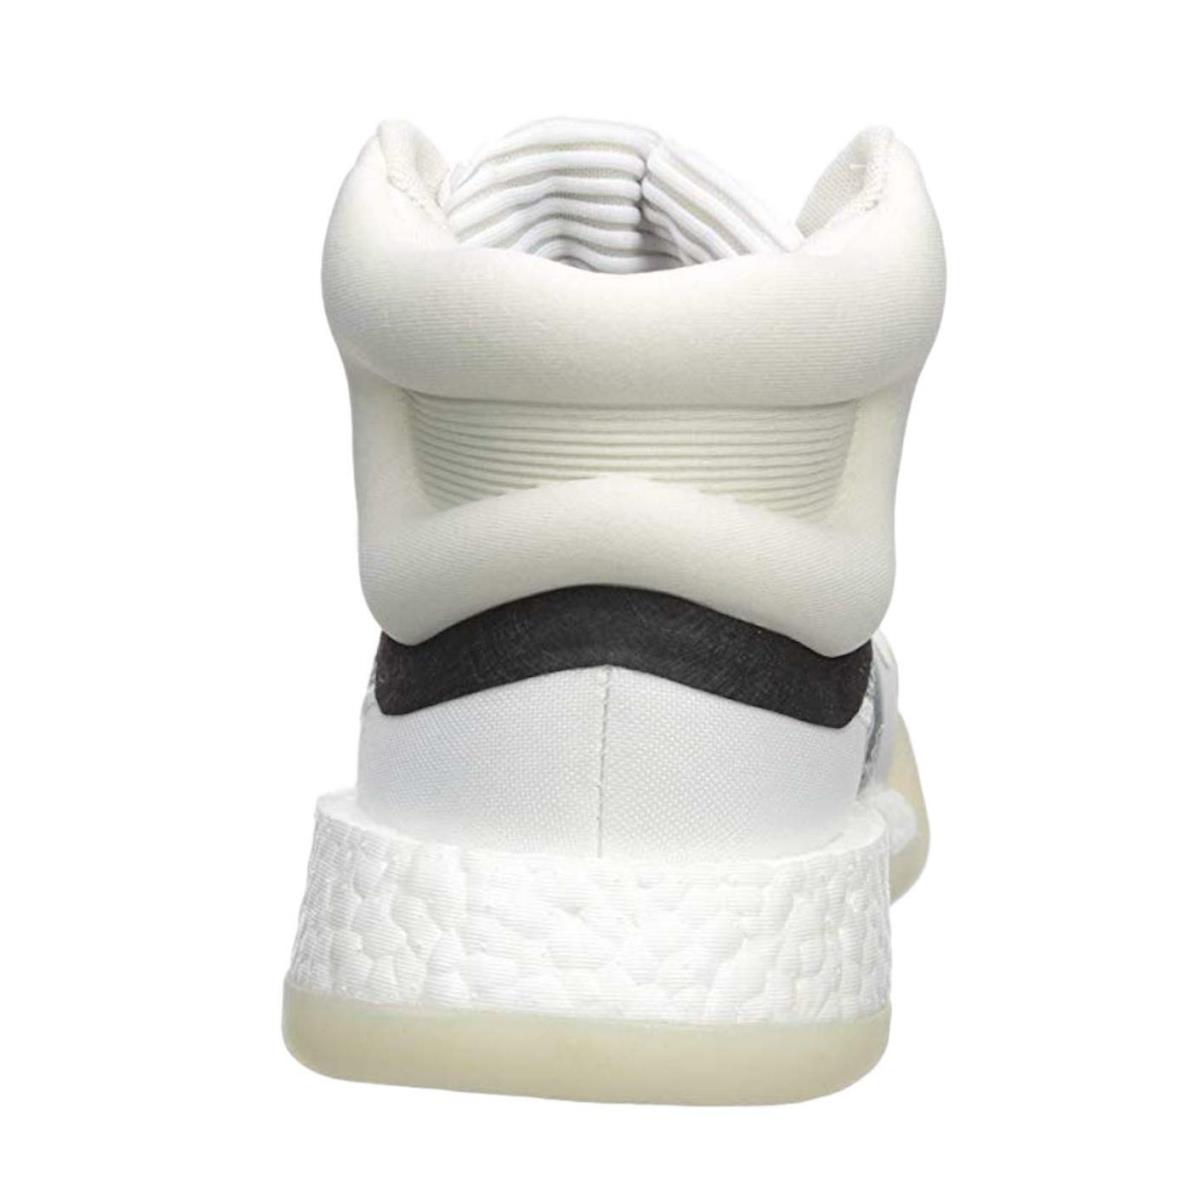 Adidas shoes Marquee Boost - Off White 4